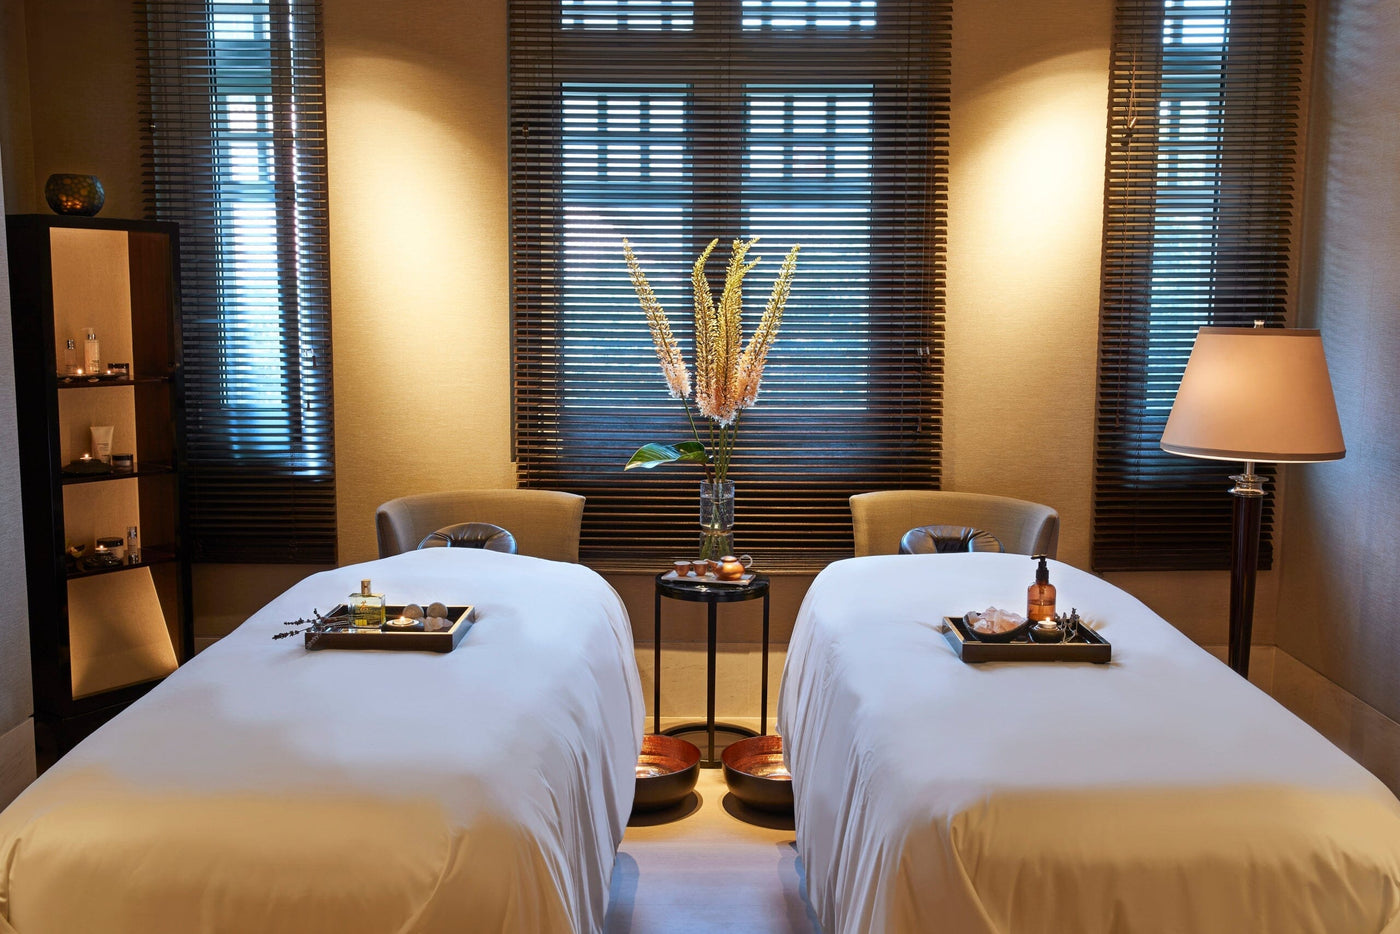 The Capitol Kempinski Hotel Singapore - 20% off Deep Tissue Muscle Relief Massage at The Spa [e-Voucher]